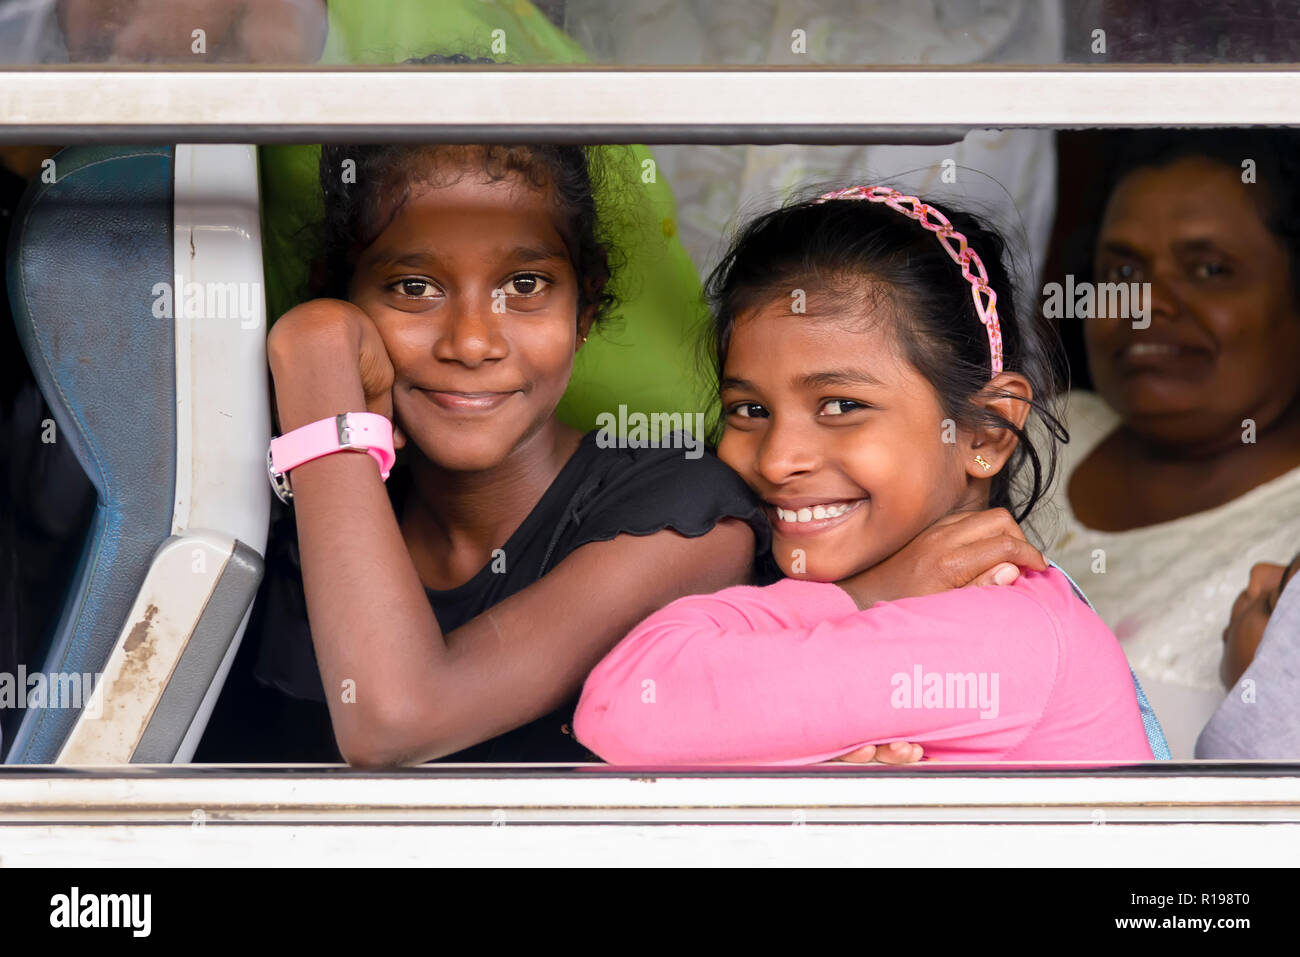 Kandy, Sri Lanka - August 19, 2017: Two smiling girls looking through window train at the Kandy's train station Stock Photo